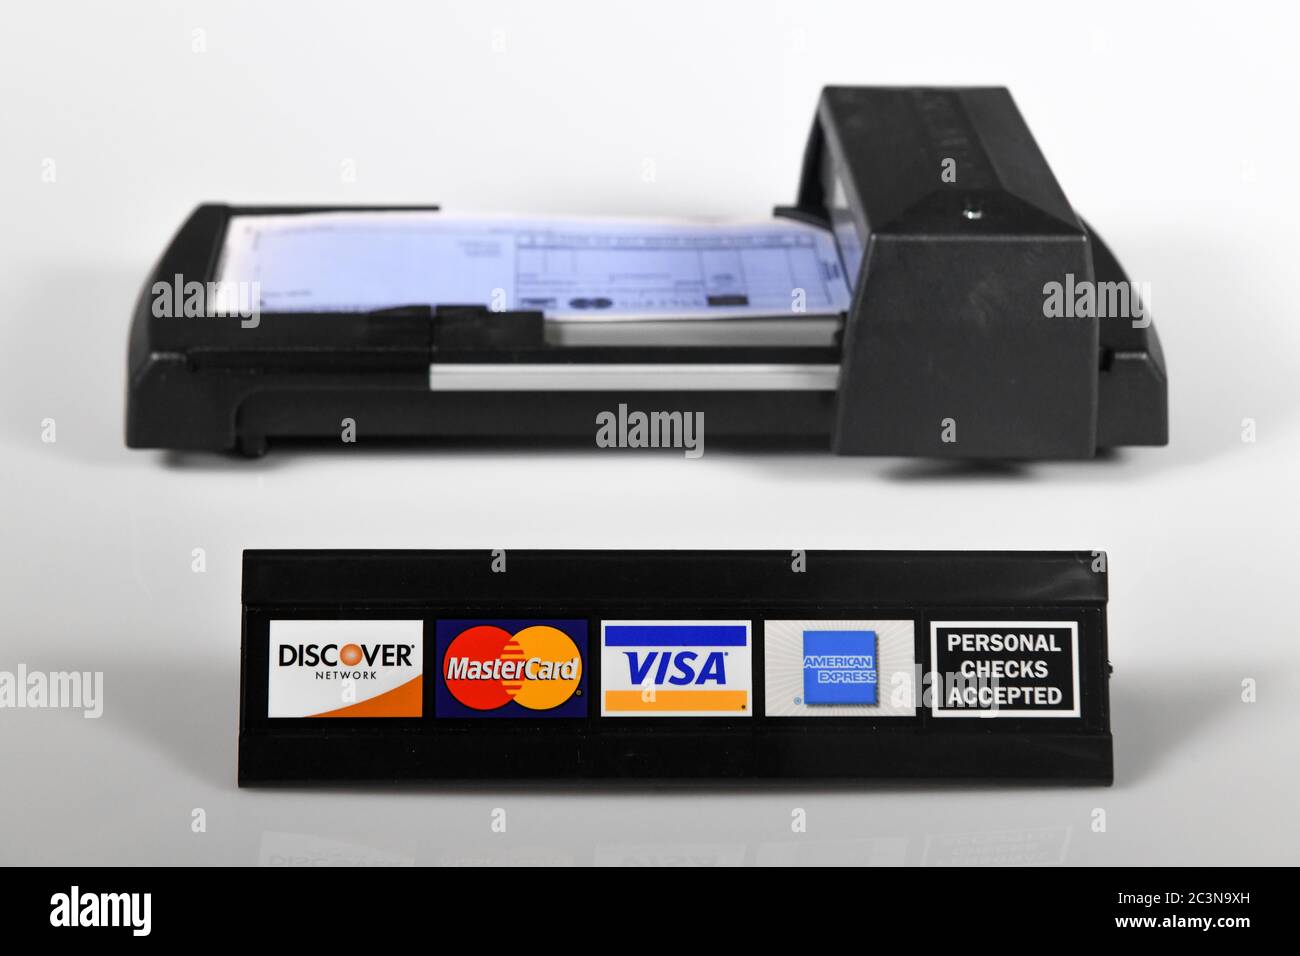 Manual credit card machine - old technology - a manually operated credit card imprinter with credit card logos - personal check sign Stock Photo